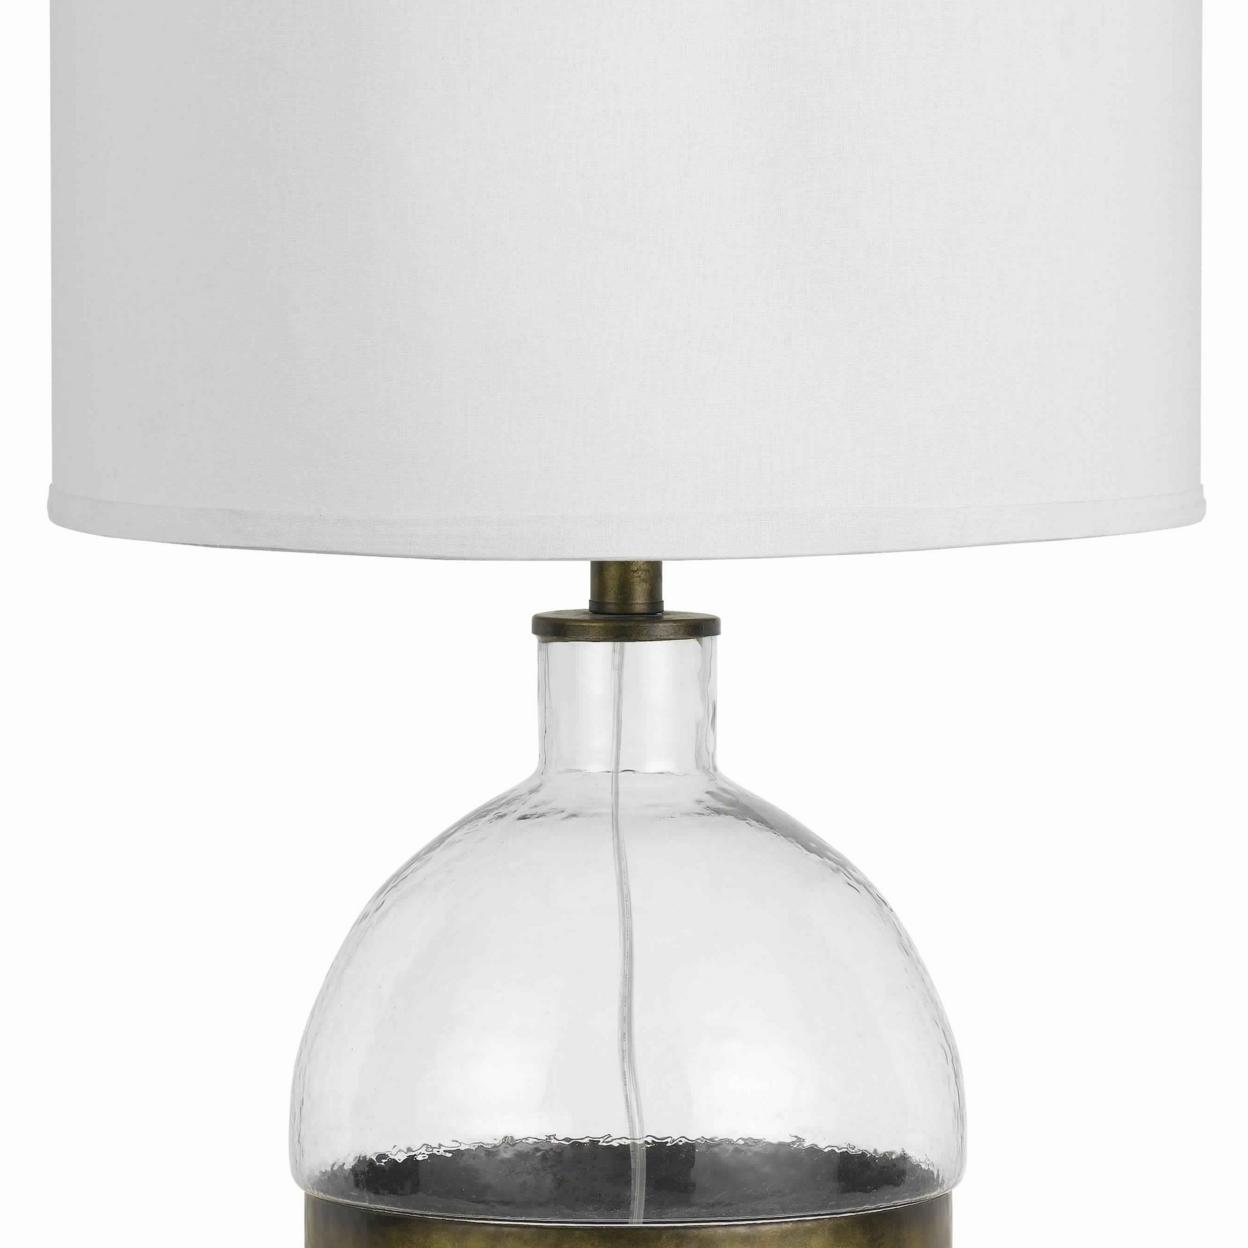 3 Way Table Lamp With Glass Round Base And Antique Brass Accent, White- Saltoro Sherpi